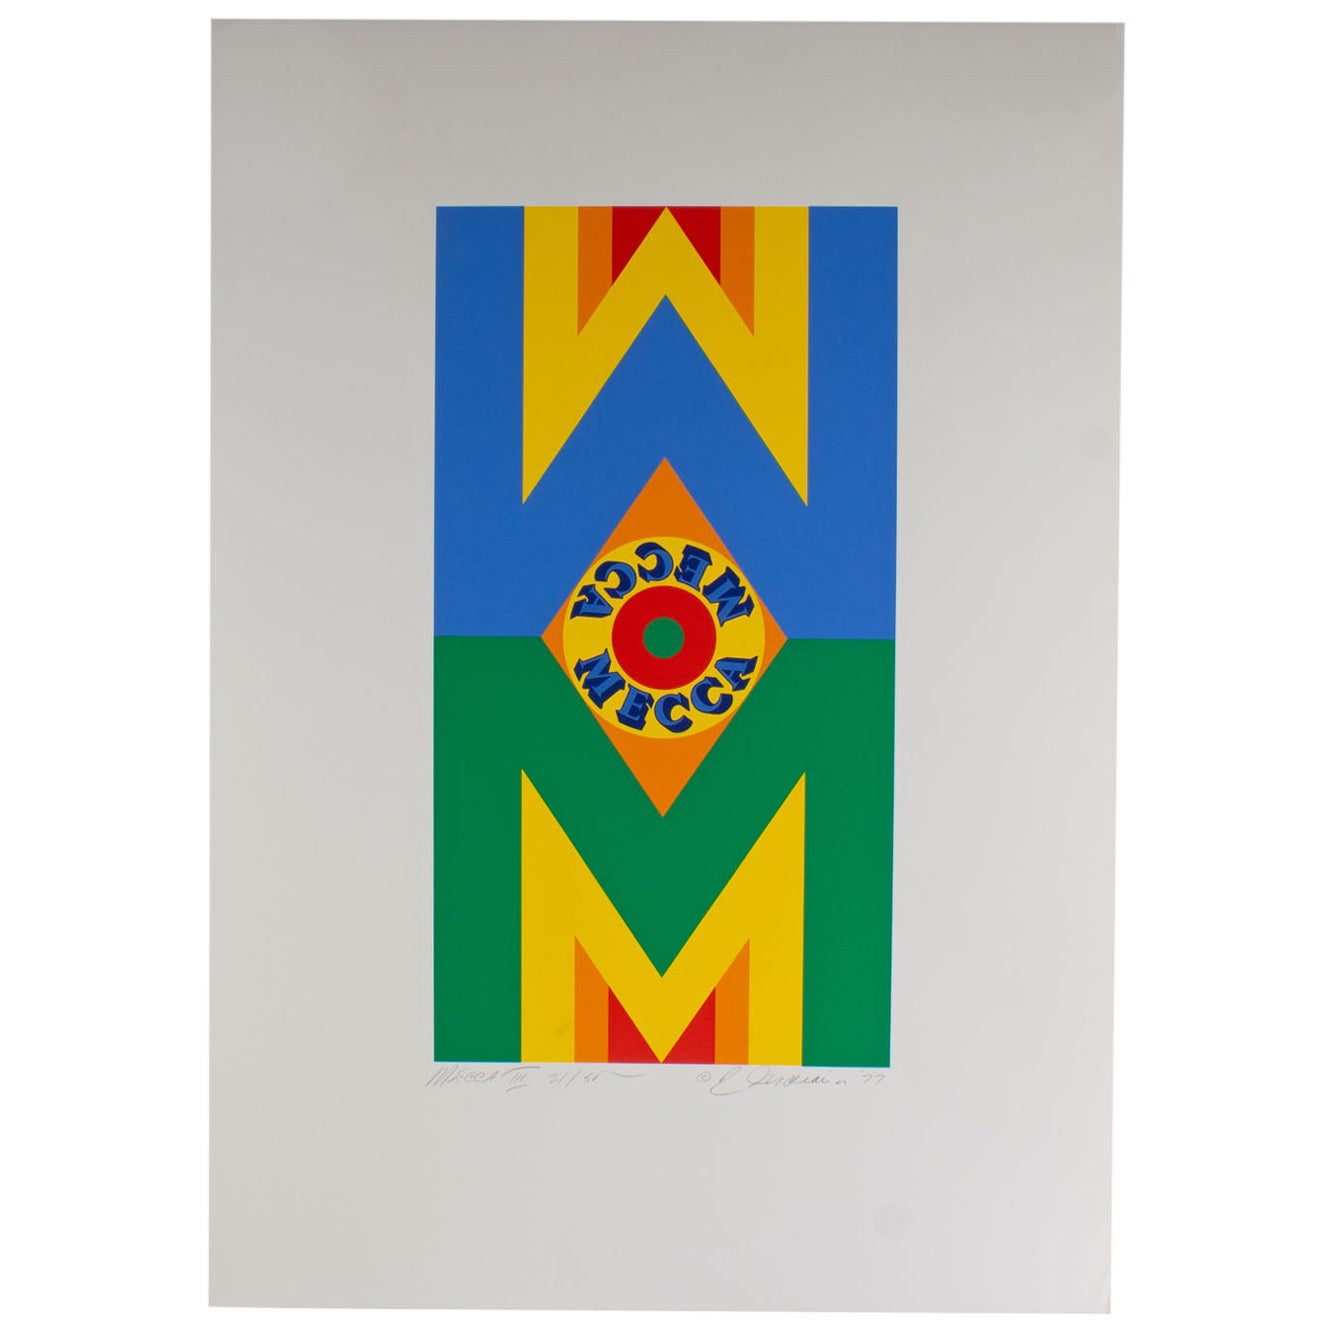 Robert Indiana Signed 1977 “Mecca III” Limited Edition Serigraph